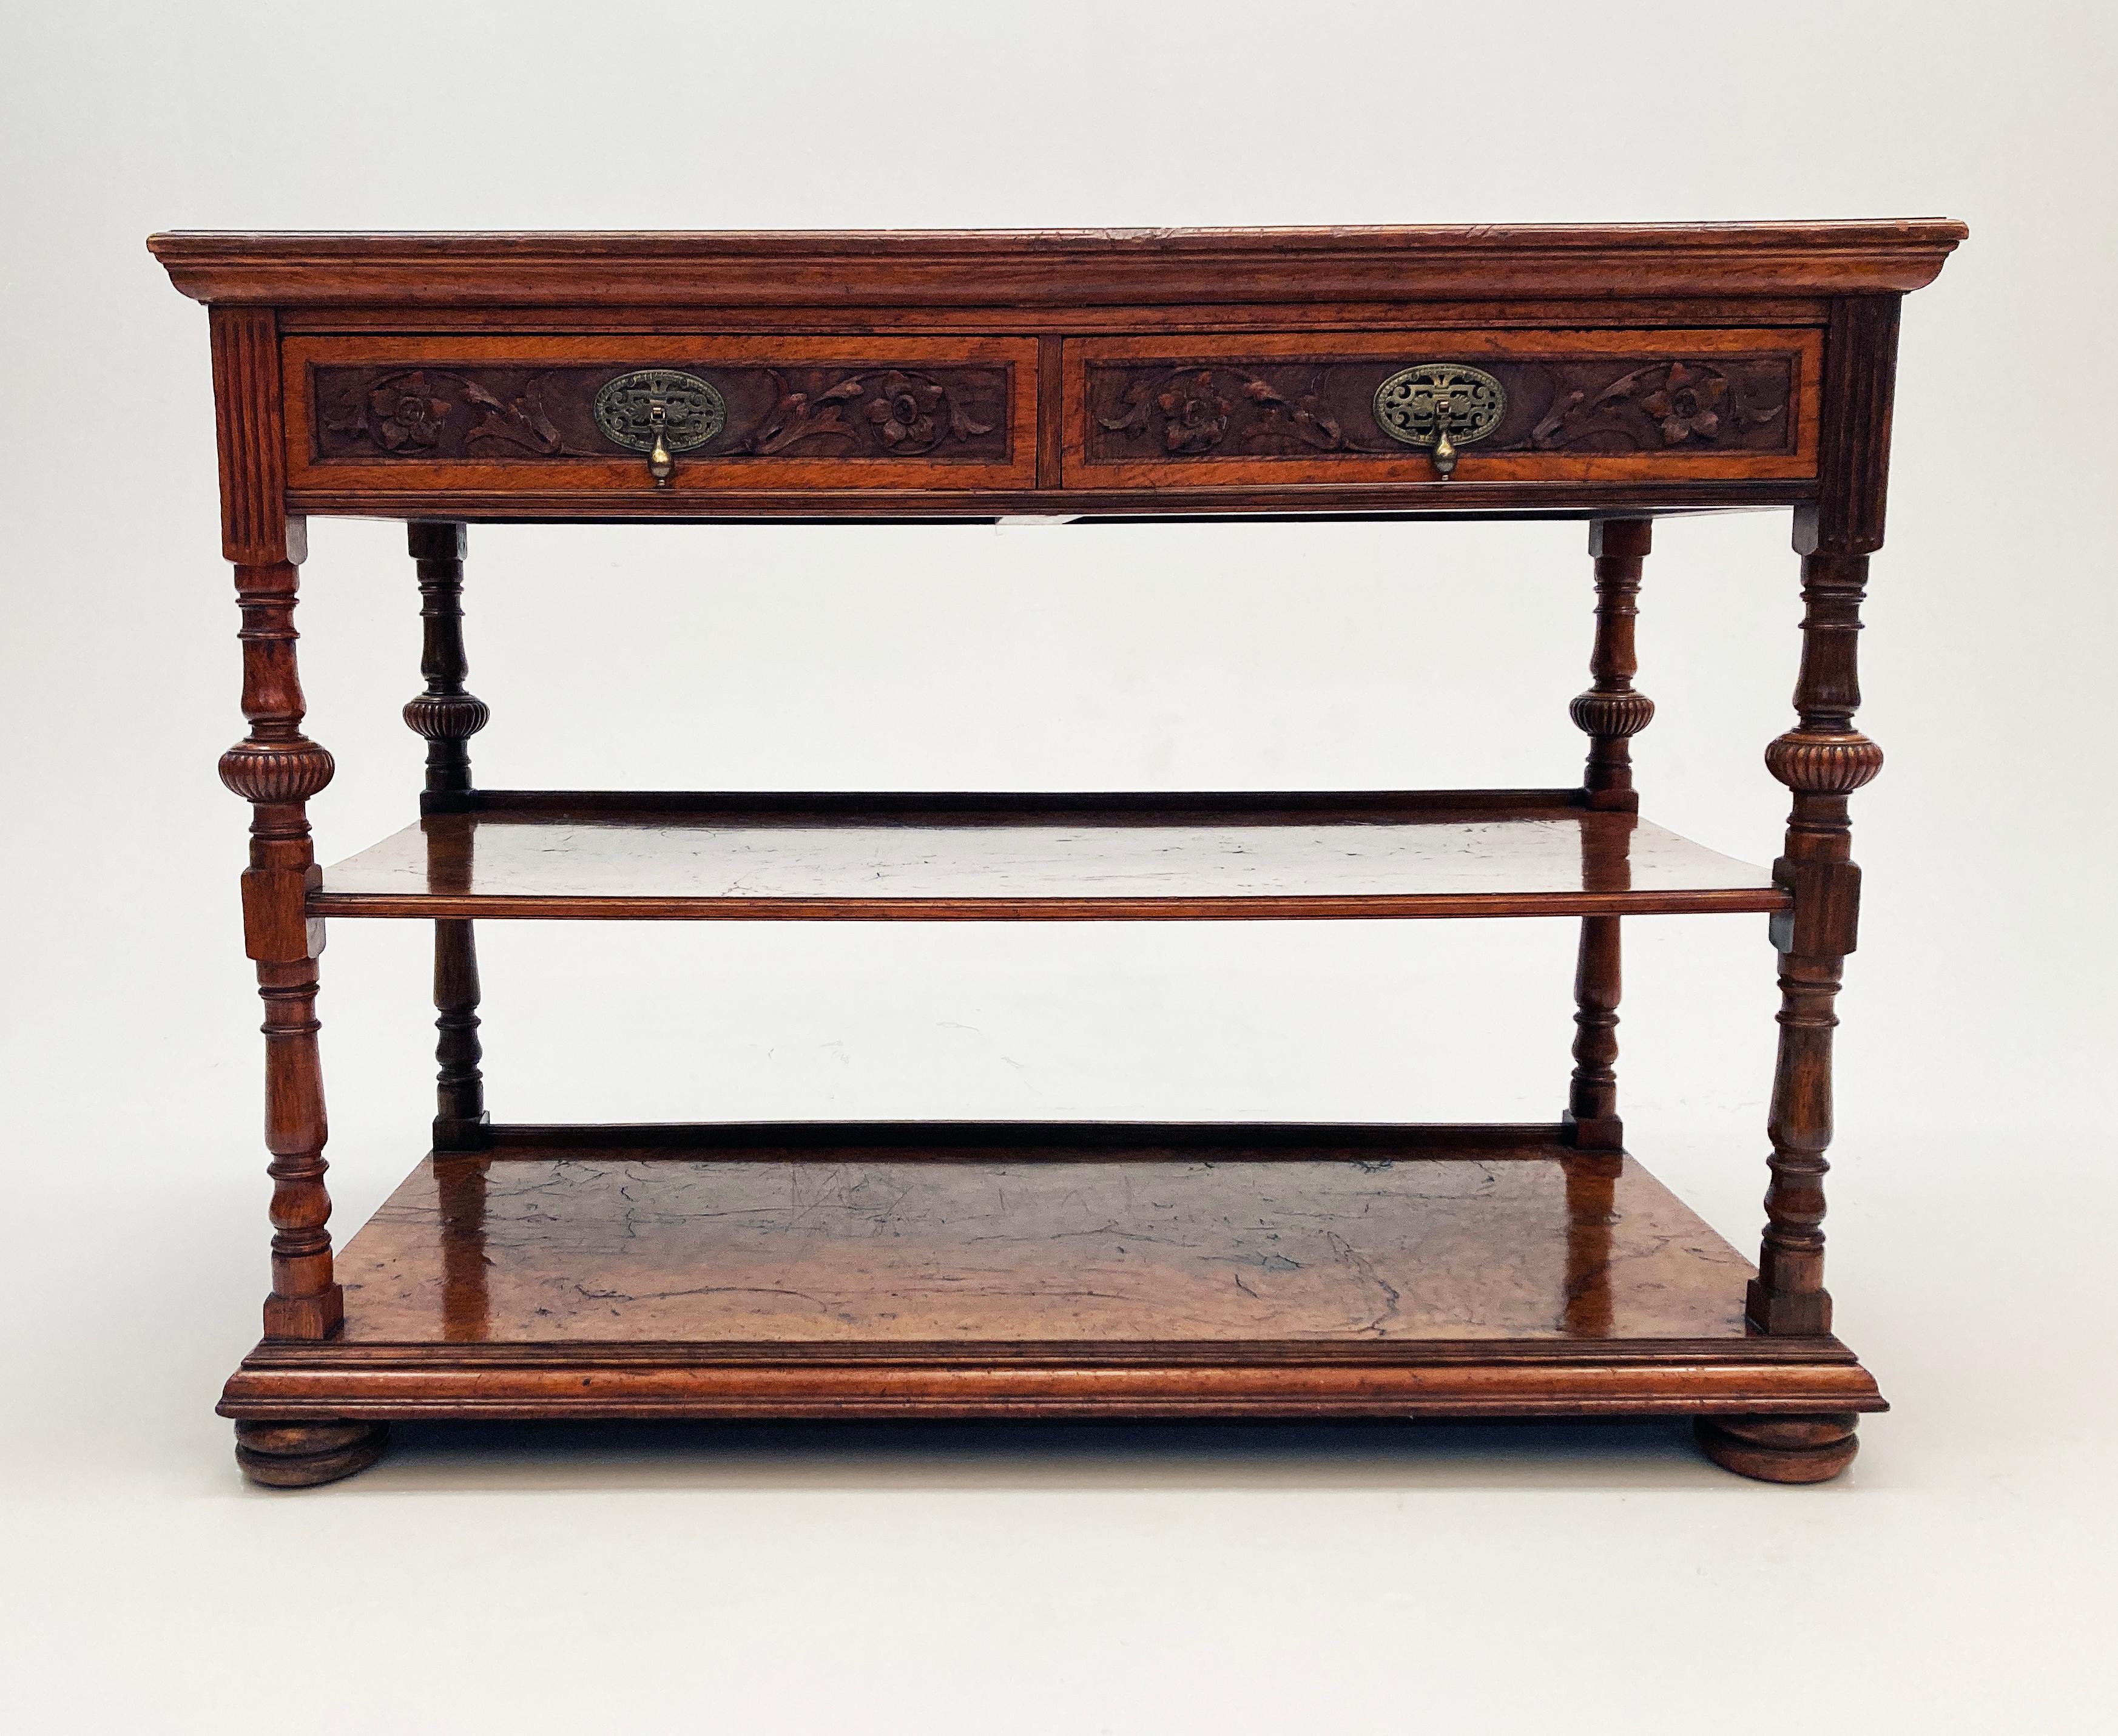 Stunning 19th Century French Burl Walnut Buffett with two panel drawers each with intricately carved floral motifs within the center panels, each drawer has brass hardware with ornate markings and a droplet pull handle. The piece boasts two lower